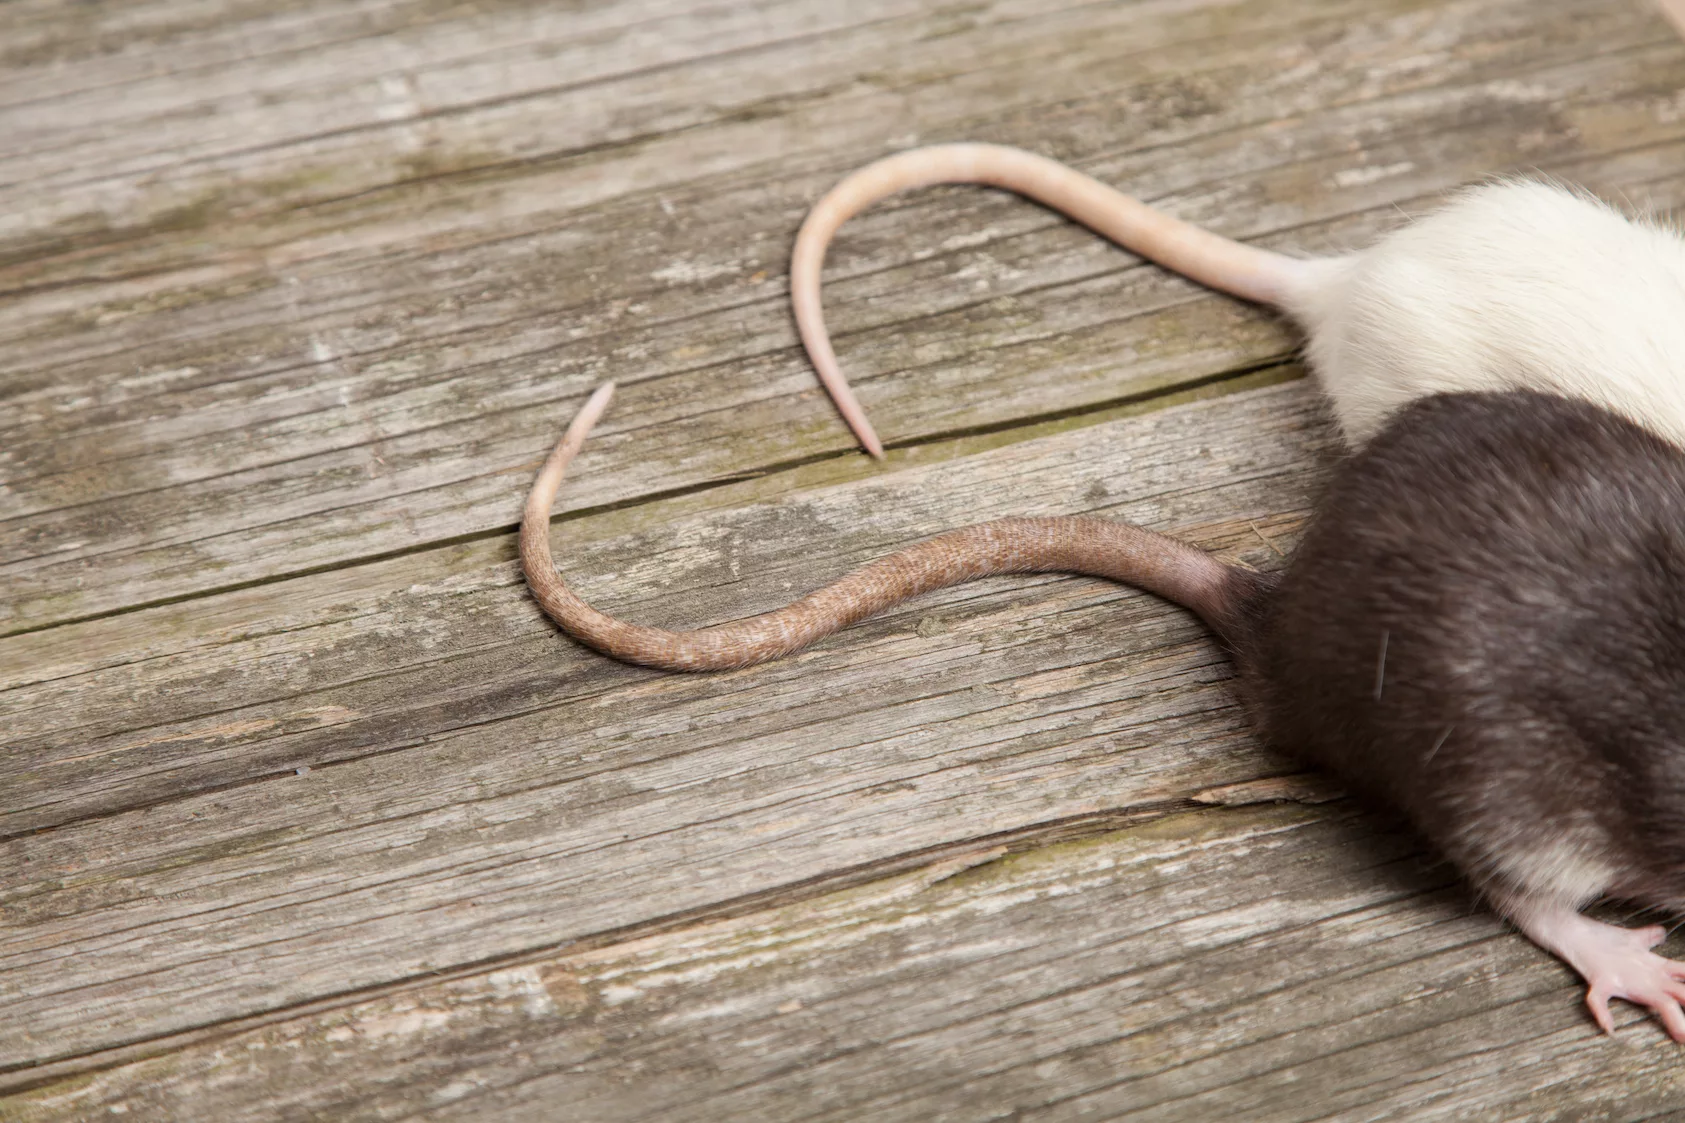 How To Get Rid of Rats  Do-It-Yourself Pest Control